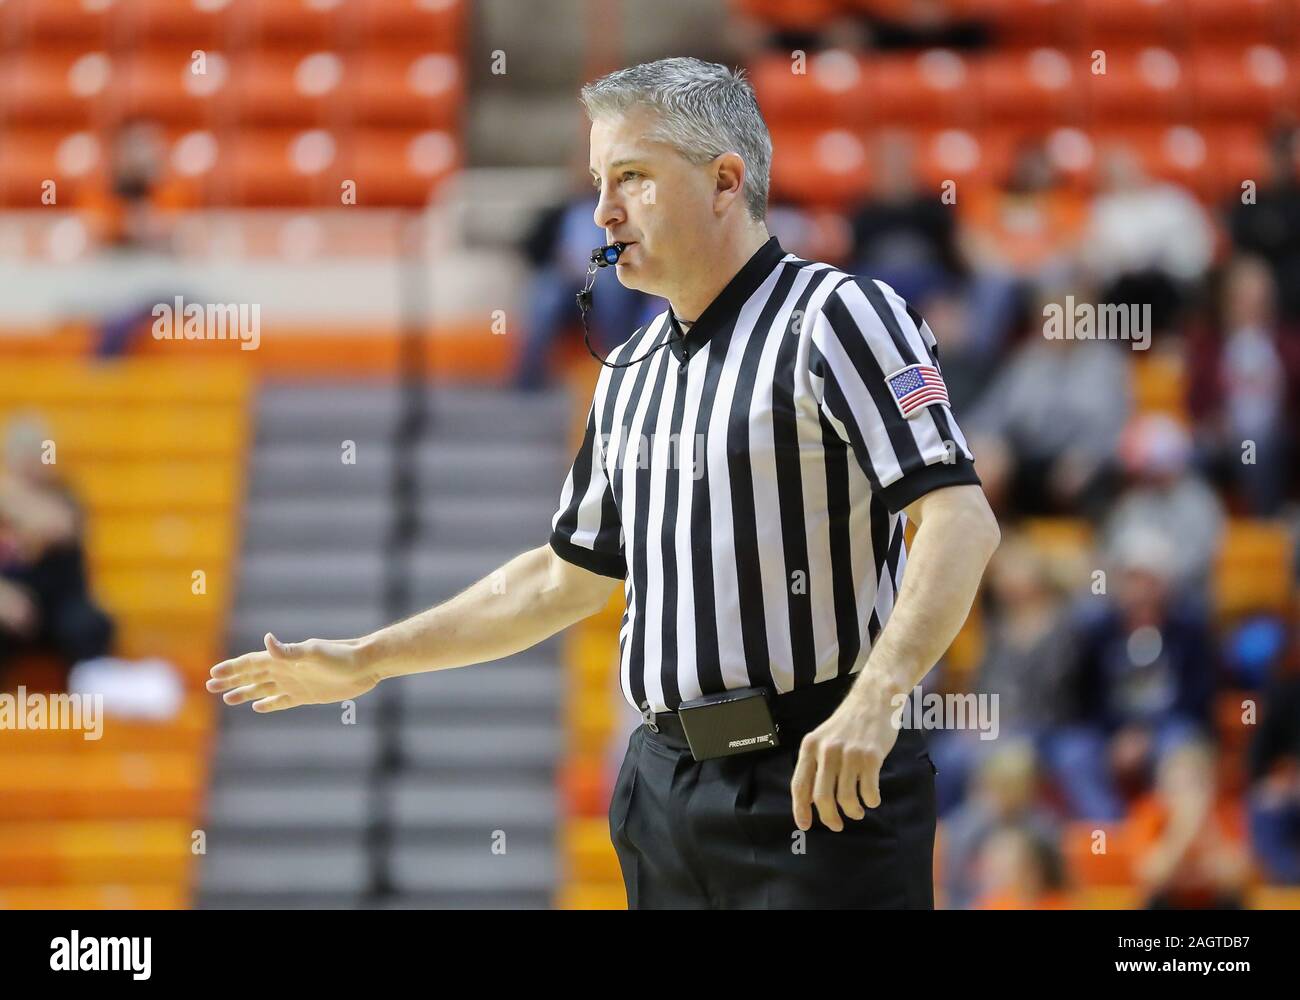 Stillwater, OK, USA. 20th Dec, 2019. A Big 12 official during a basketball game between the Oral Roberts Golden Eagles and Oklahoma State Cowgirls at Gallagher-Iba Arena in Stillwater, OK. Gray Siegel/CSM/Alamy Live News Stock Photo